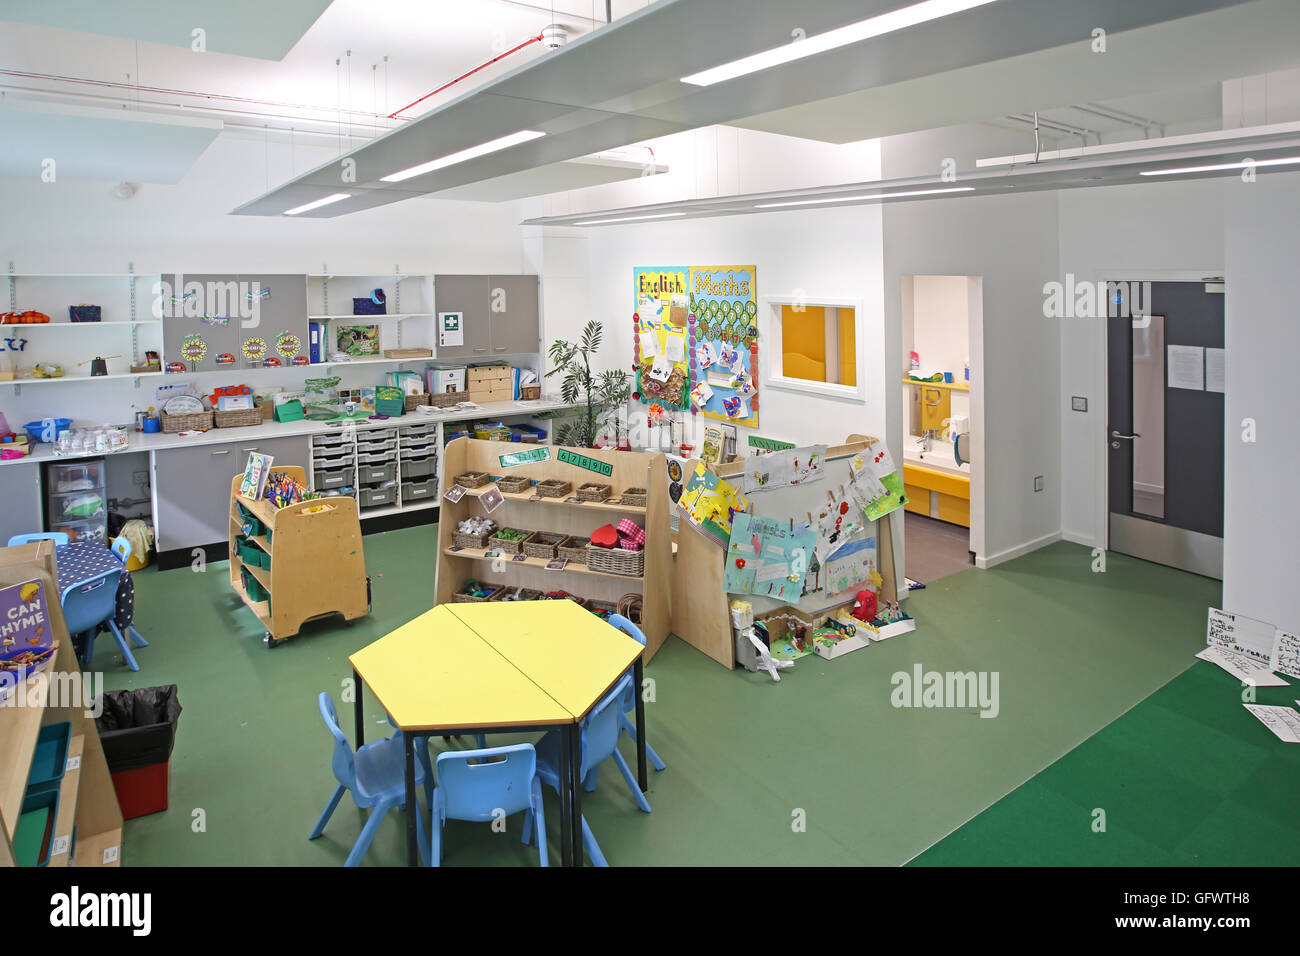 Nursery classroom in a new, London primary school. Shows desks and chairs with pupil's artwork on the walls Stock Photo